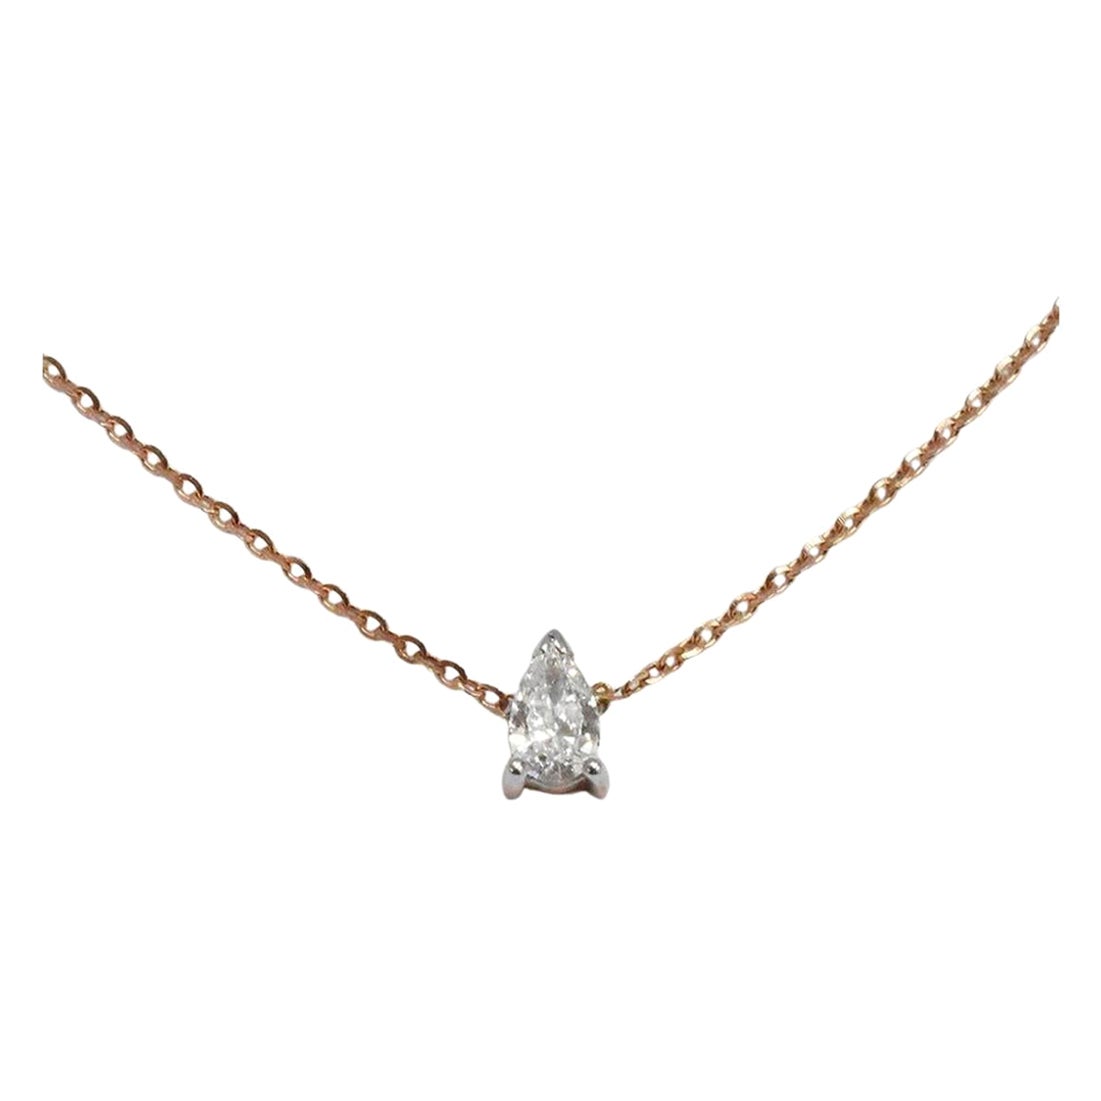 Pear Shaped Diamond Necklace made of 14k solid gold available in three colors, Rose Gold / White Gold / Yellow Gold.

Natural genuine round cut diamond each diamond is hand selected by me to ensure quality and set by a master setter in our studio.